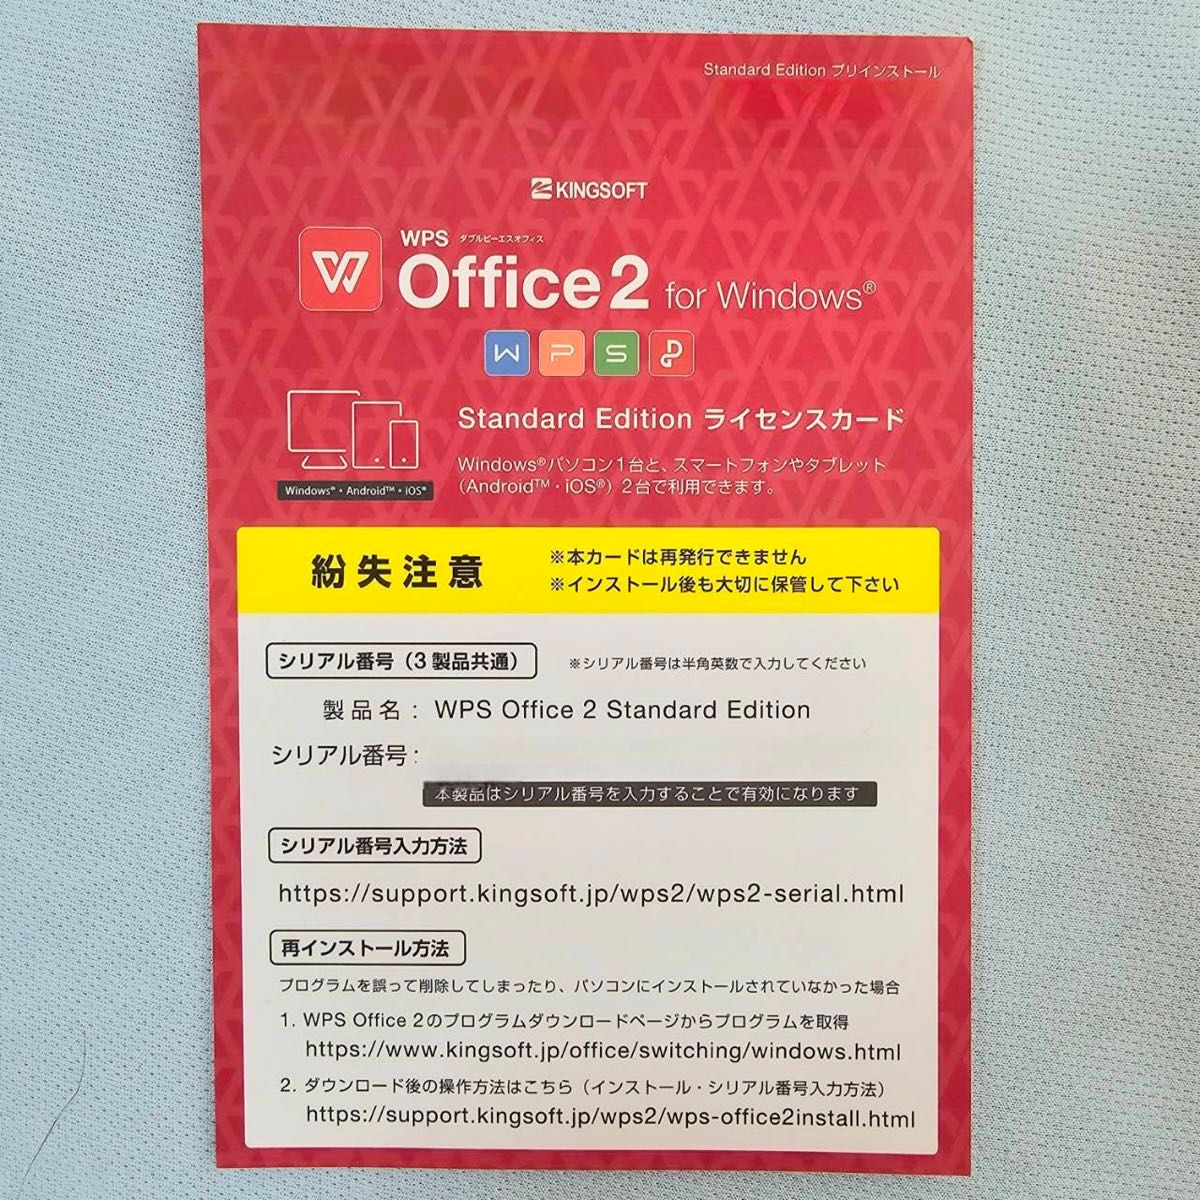 WPS Office2 for Windows Standard Edition